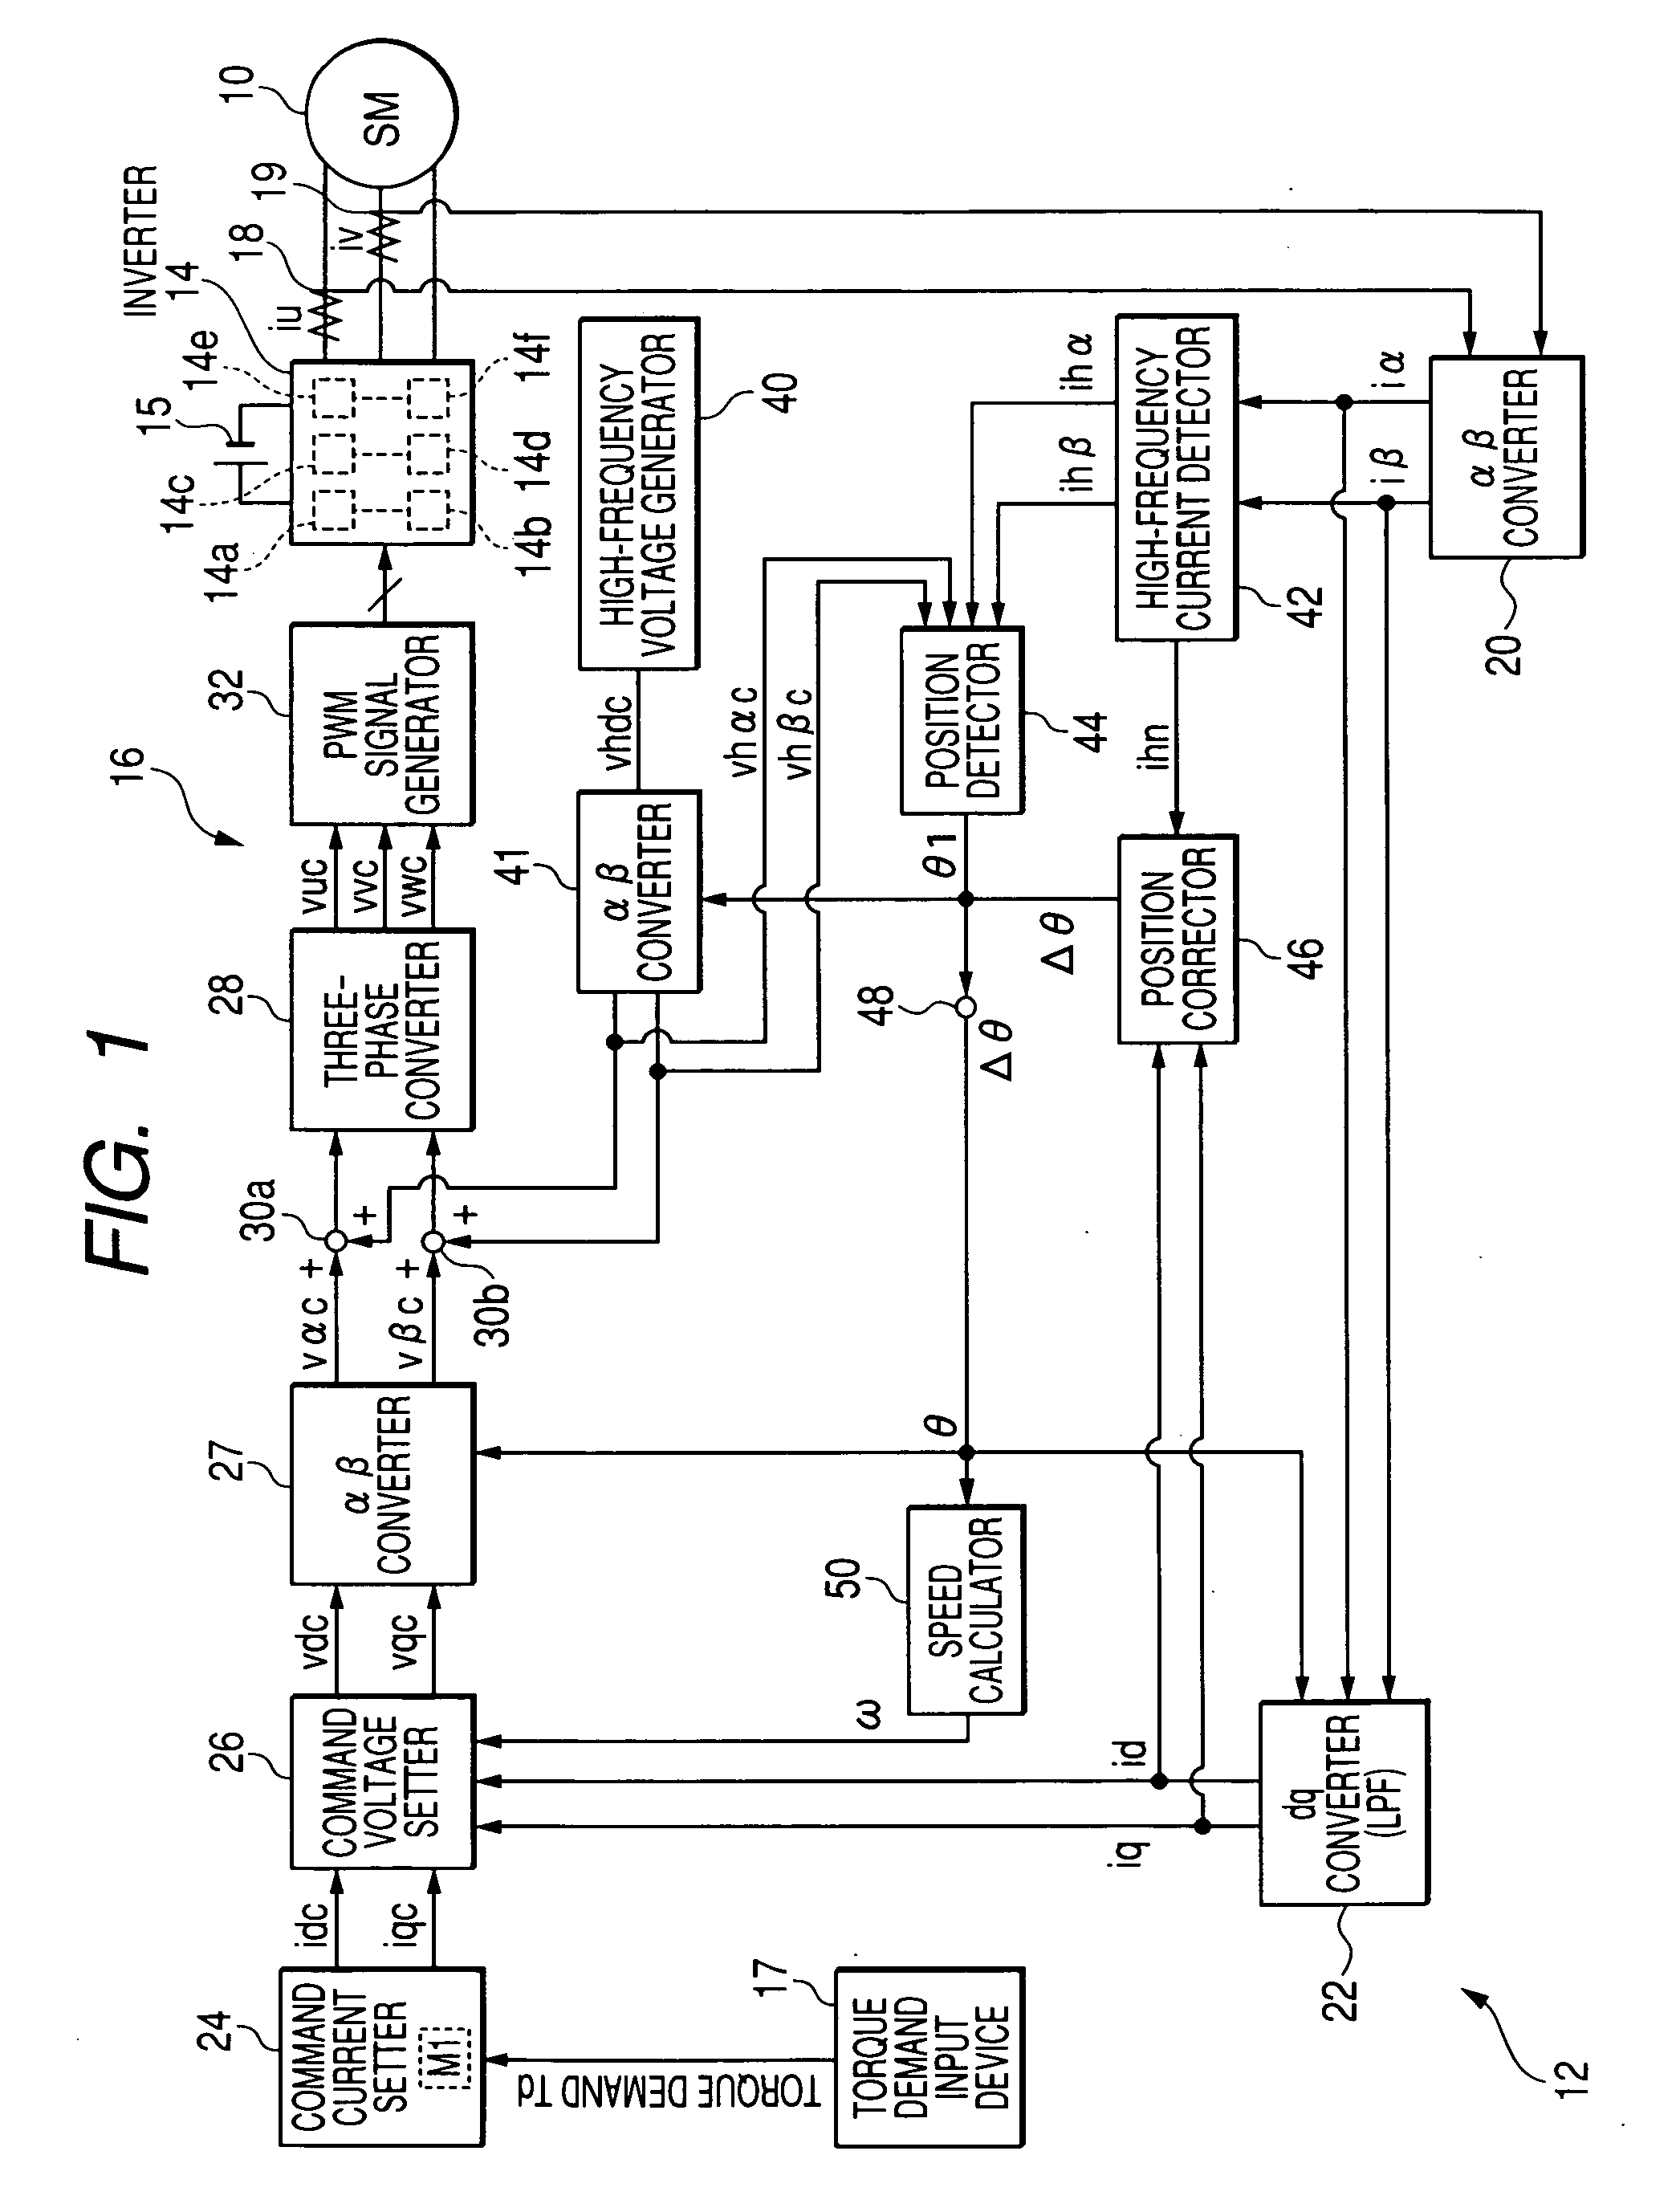 Control system for rotary electric machine with salient structure